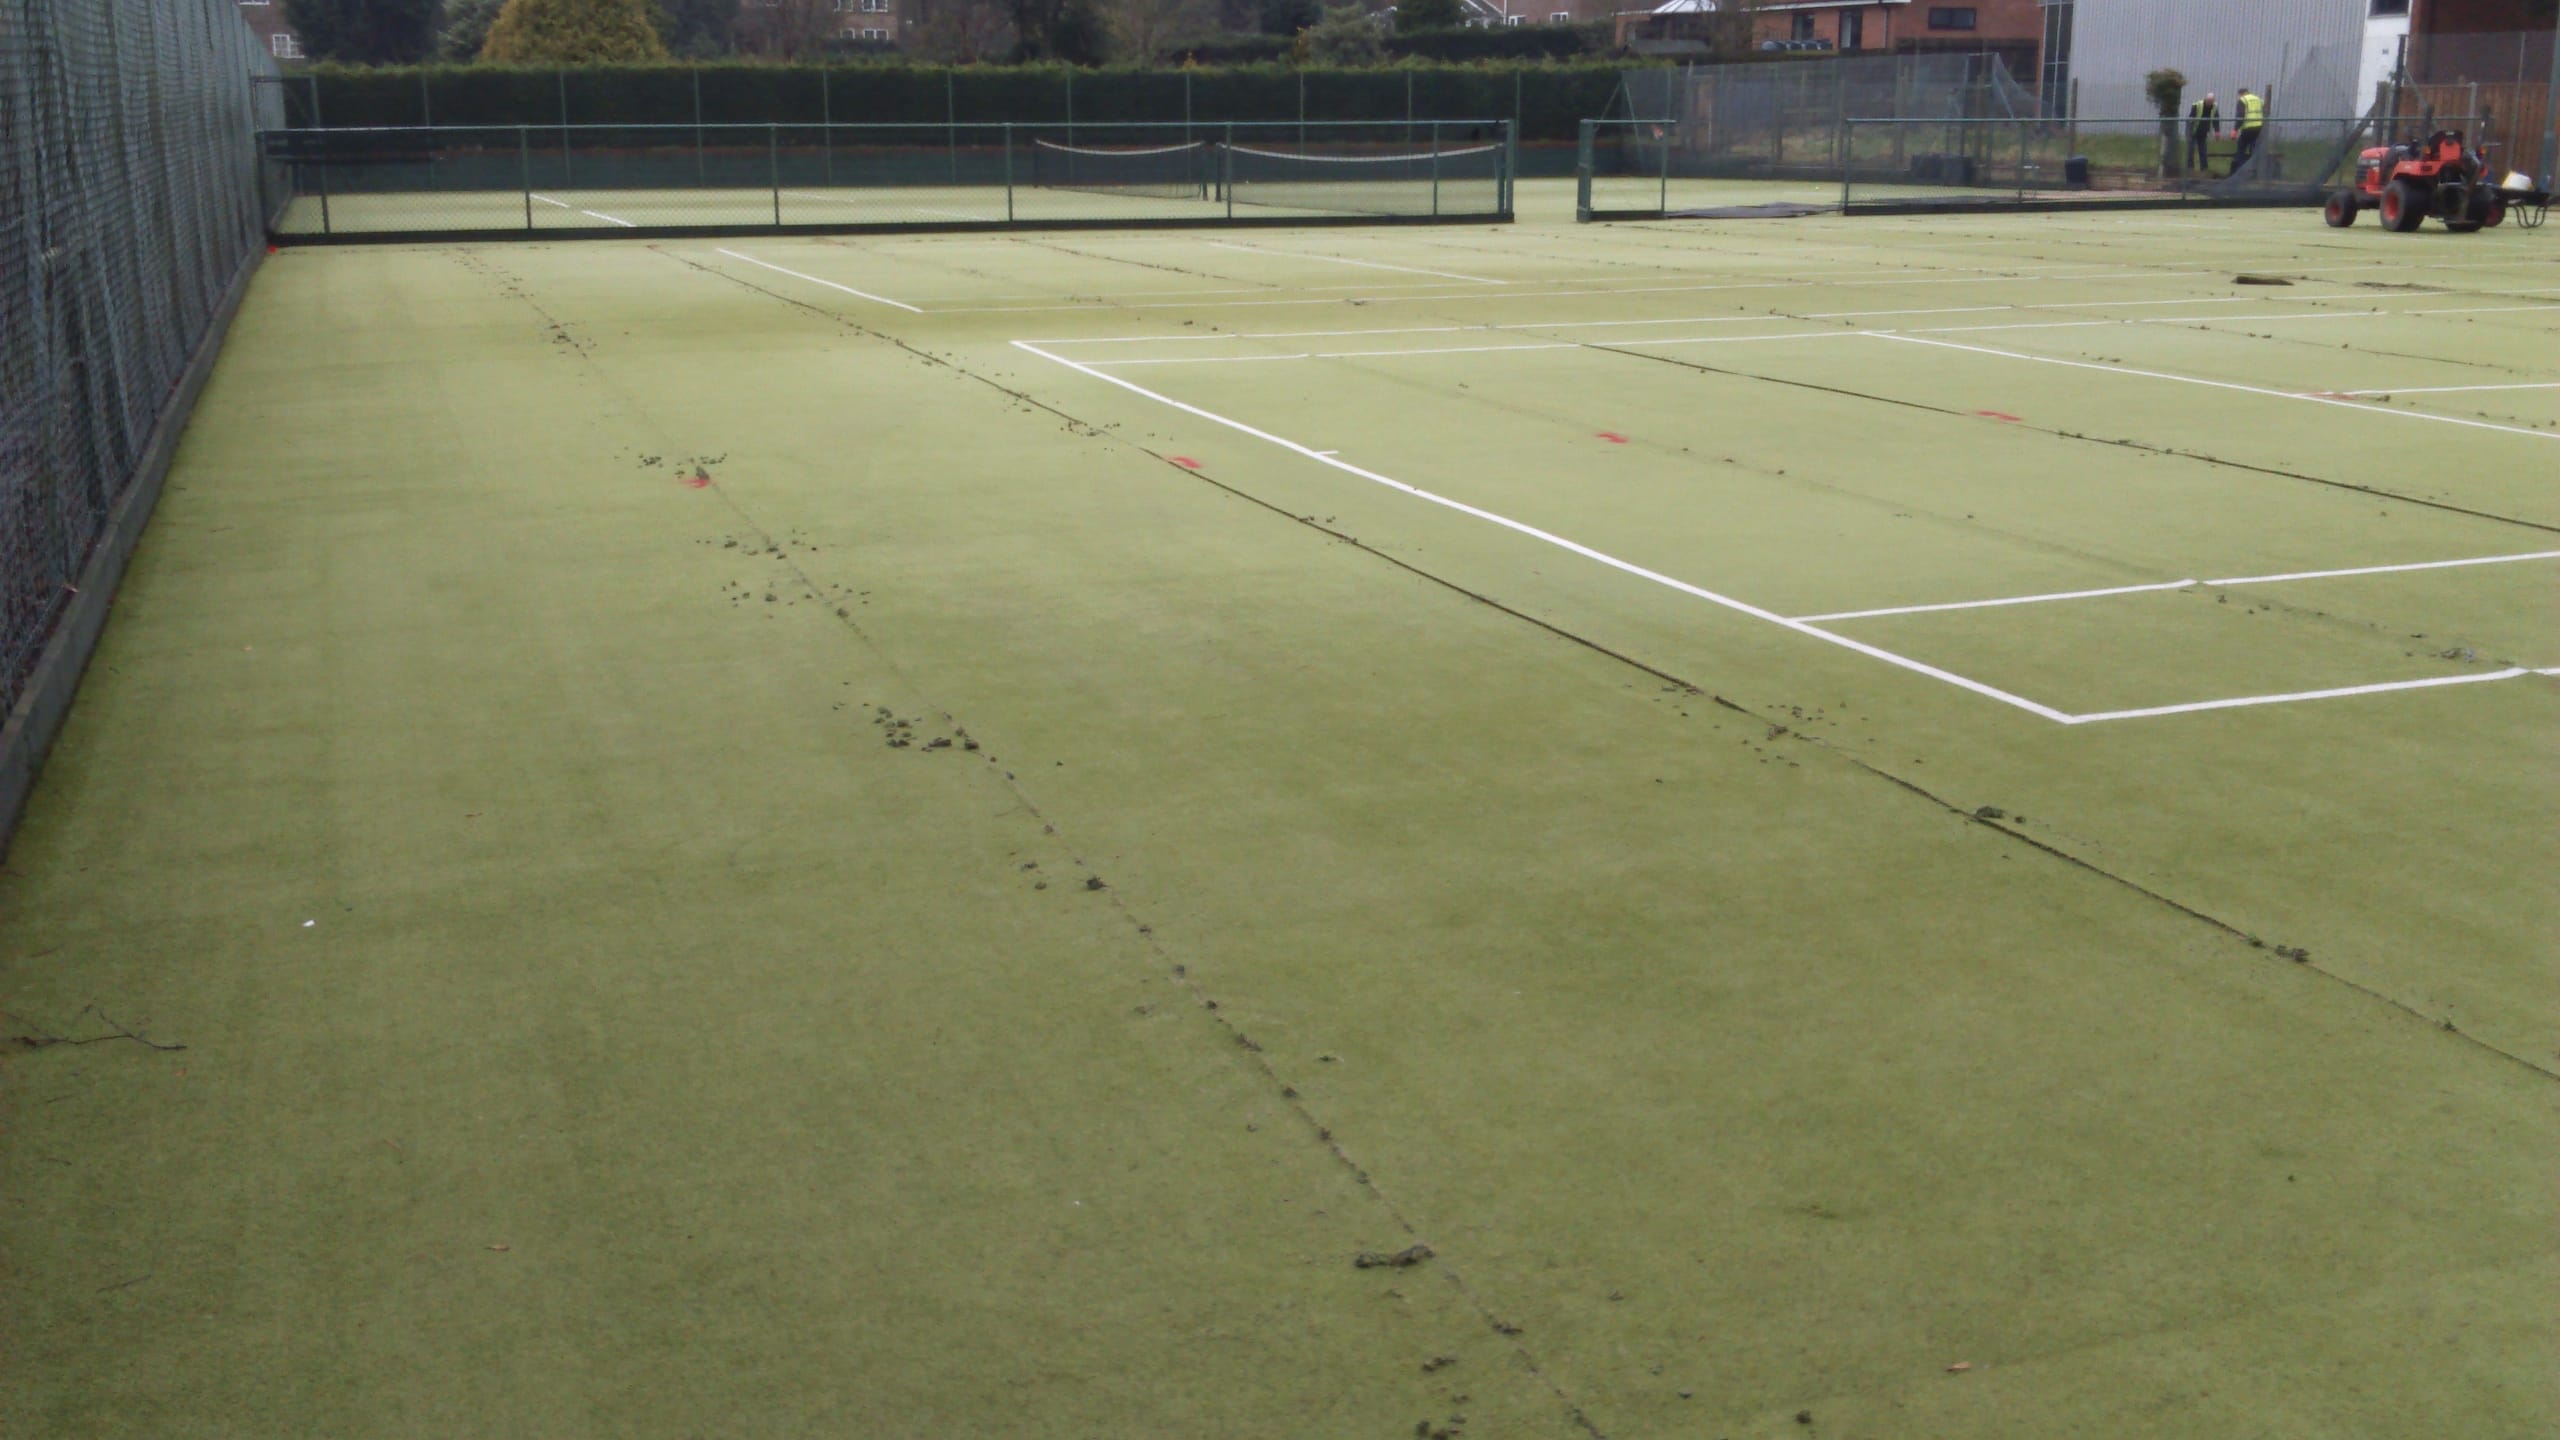 tennis court cut into sections